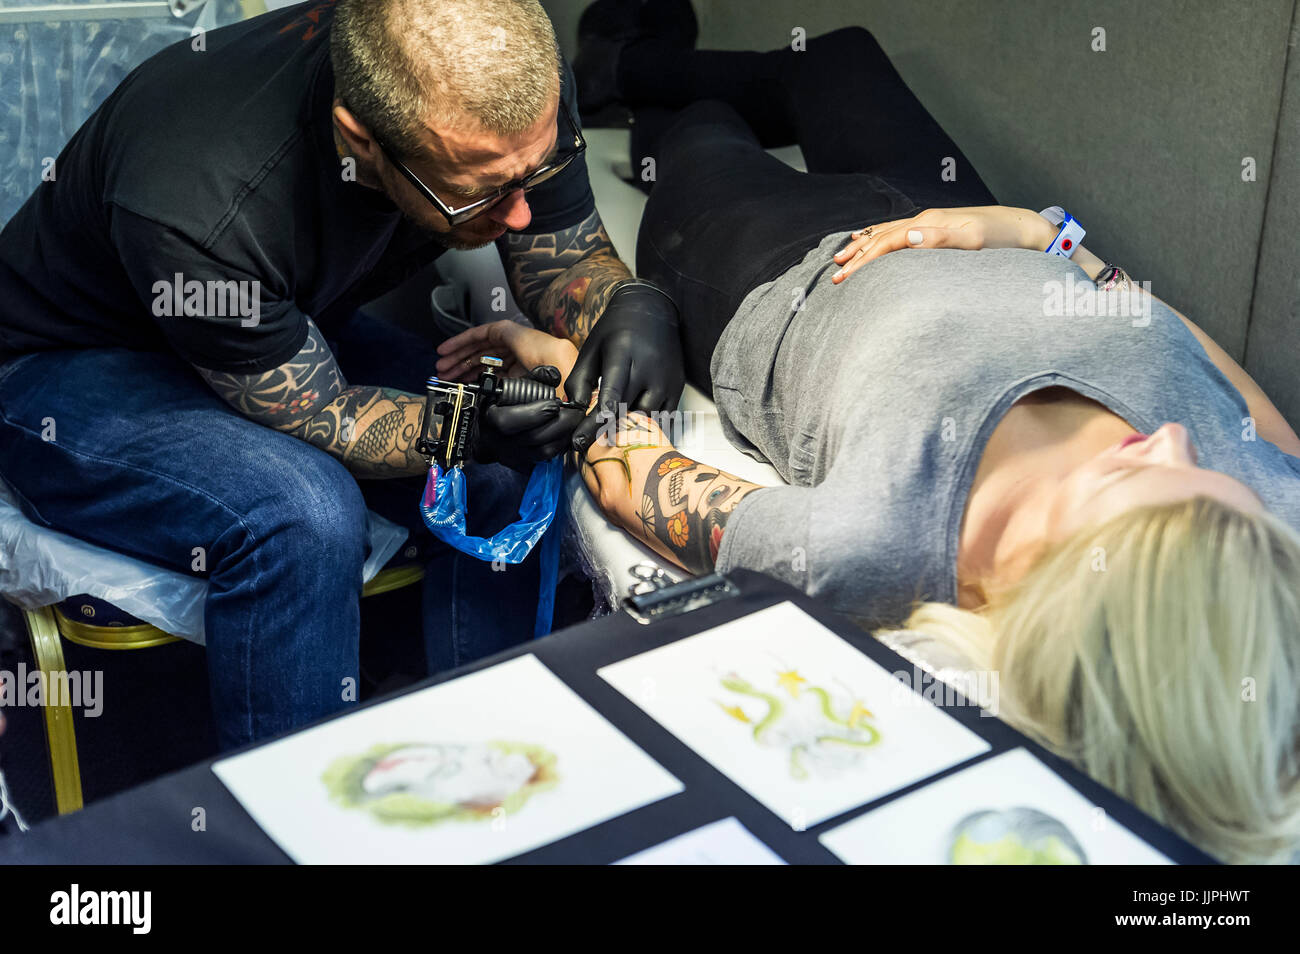 A woman being tattooed on her arm. Stock Photo